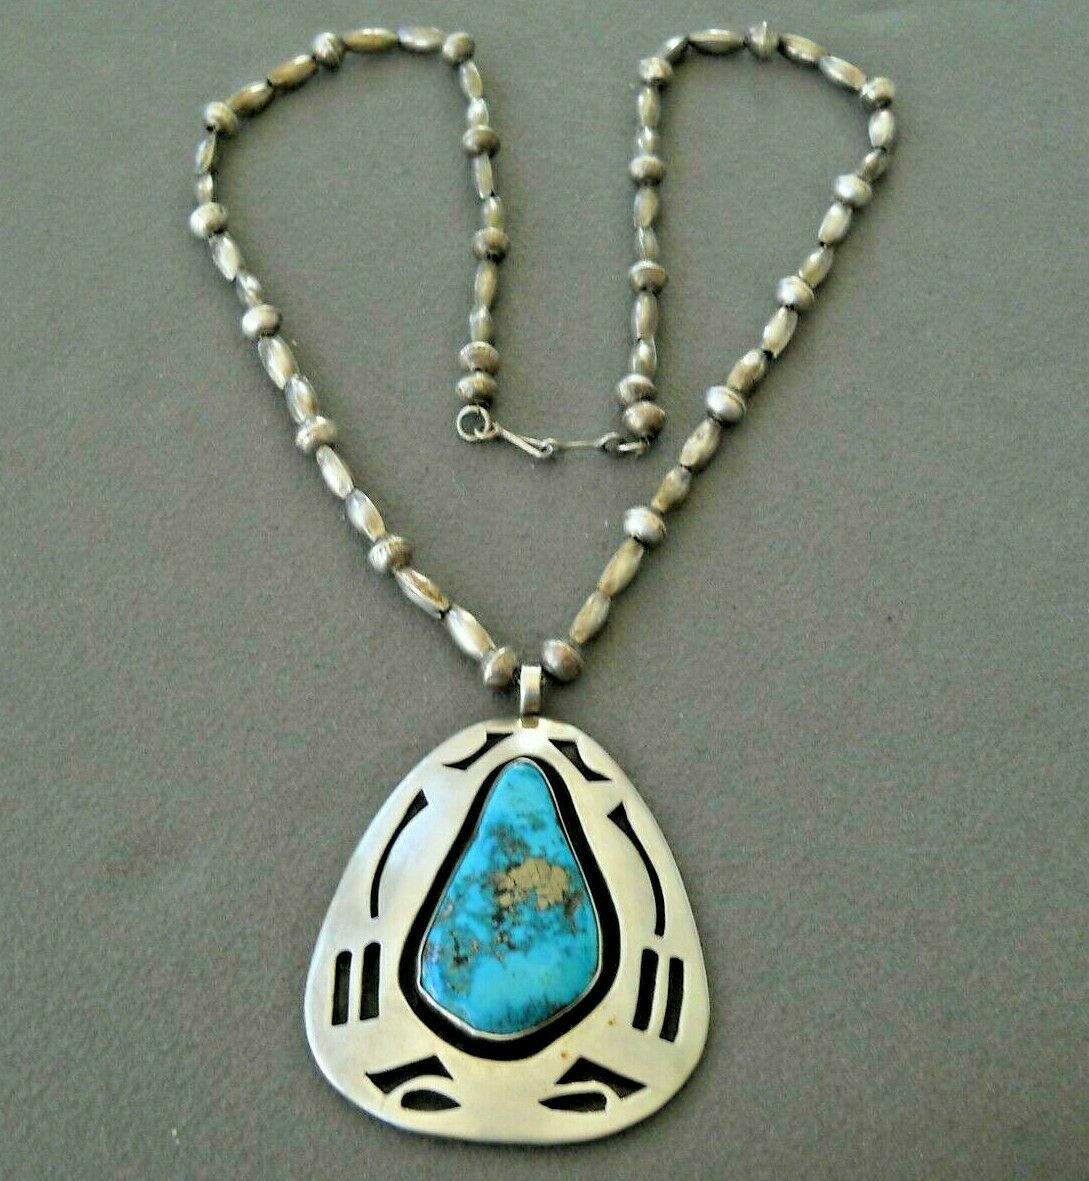 Native American Navajo Morenci Turquoise Sterling Silver Overlay Bead Necklace